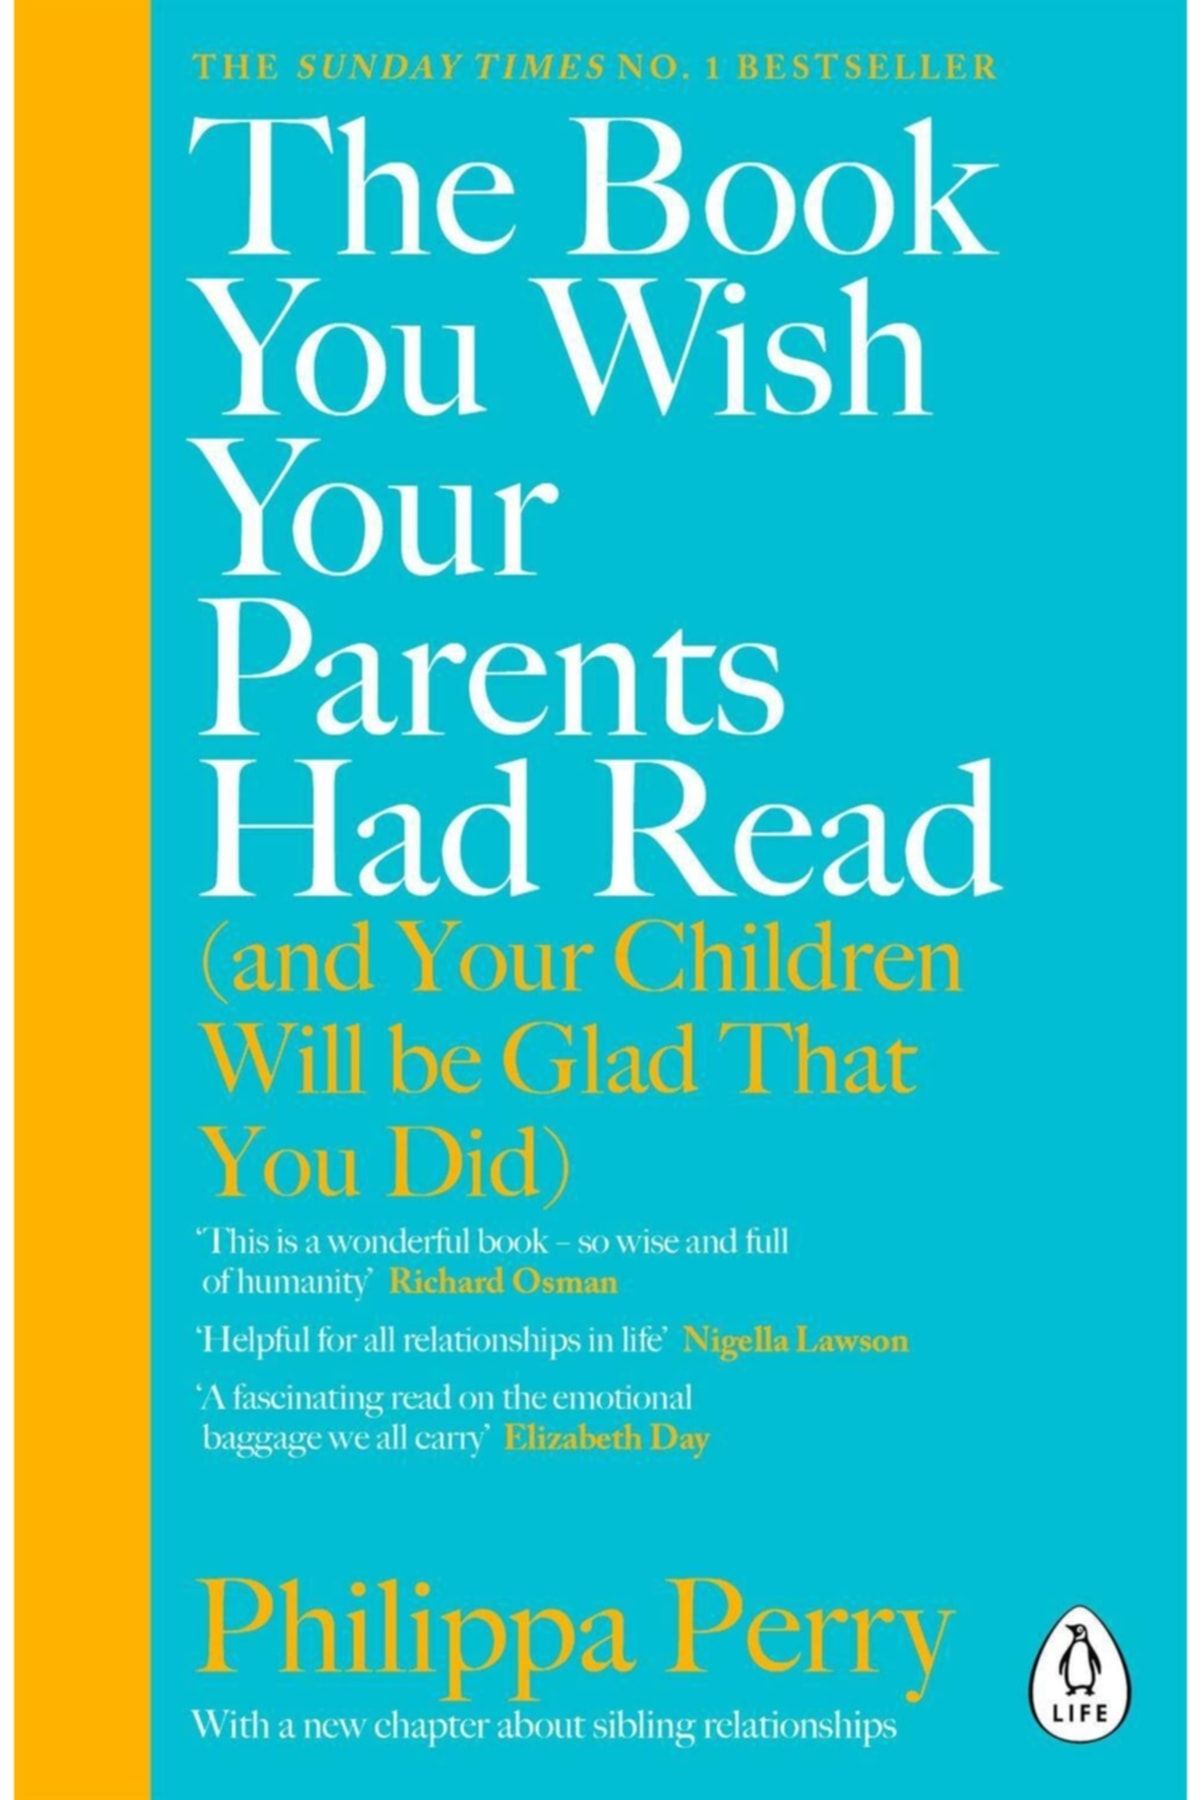 Penguin Books The Book You Wish Your Parents Had Read (and Your Children Will Be Glad That You Did)